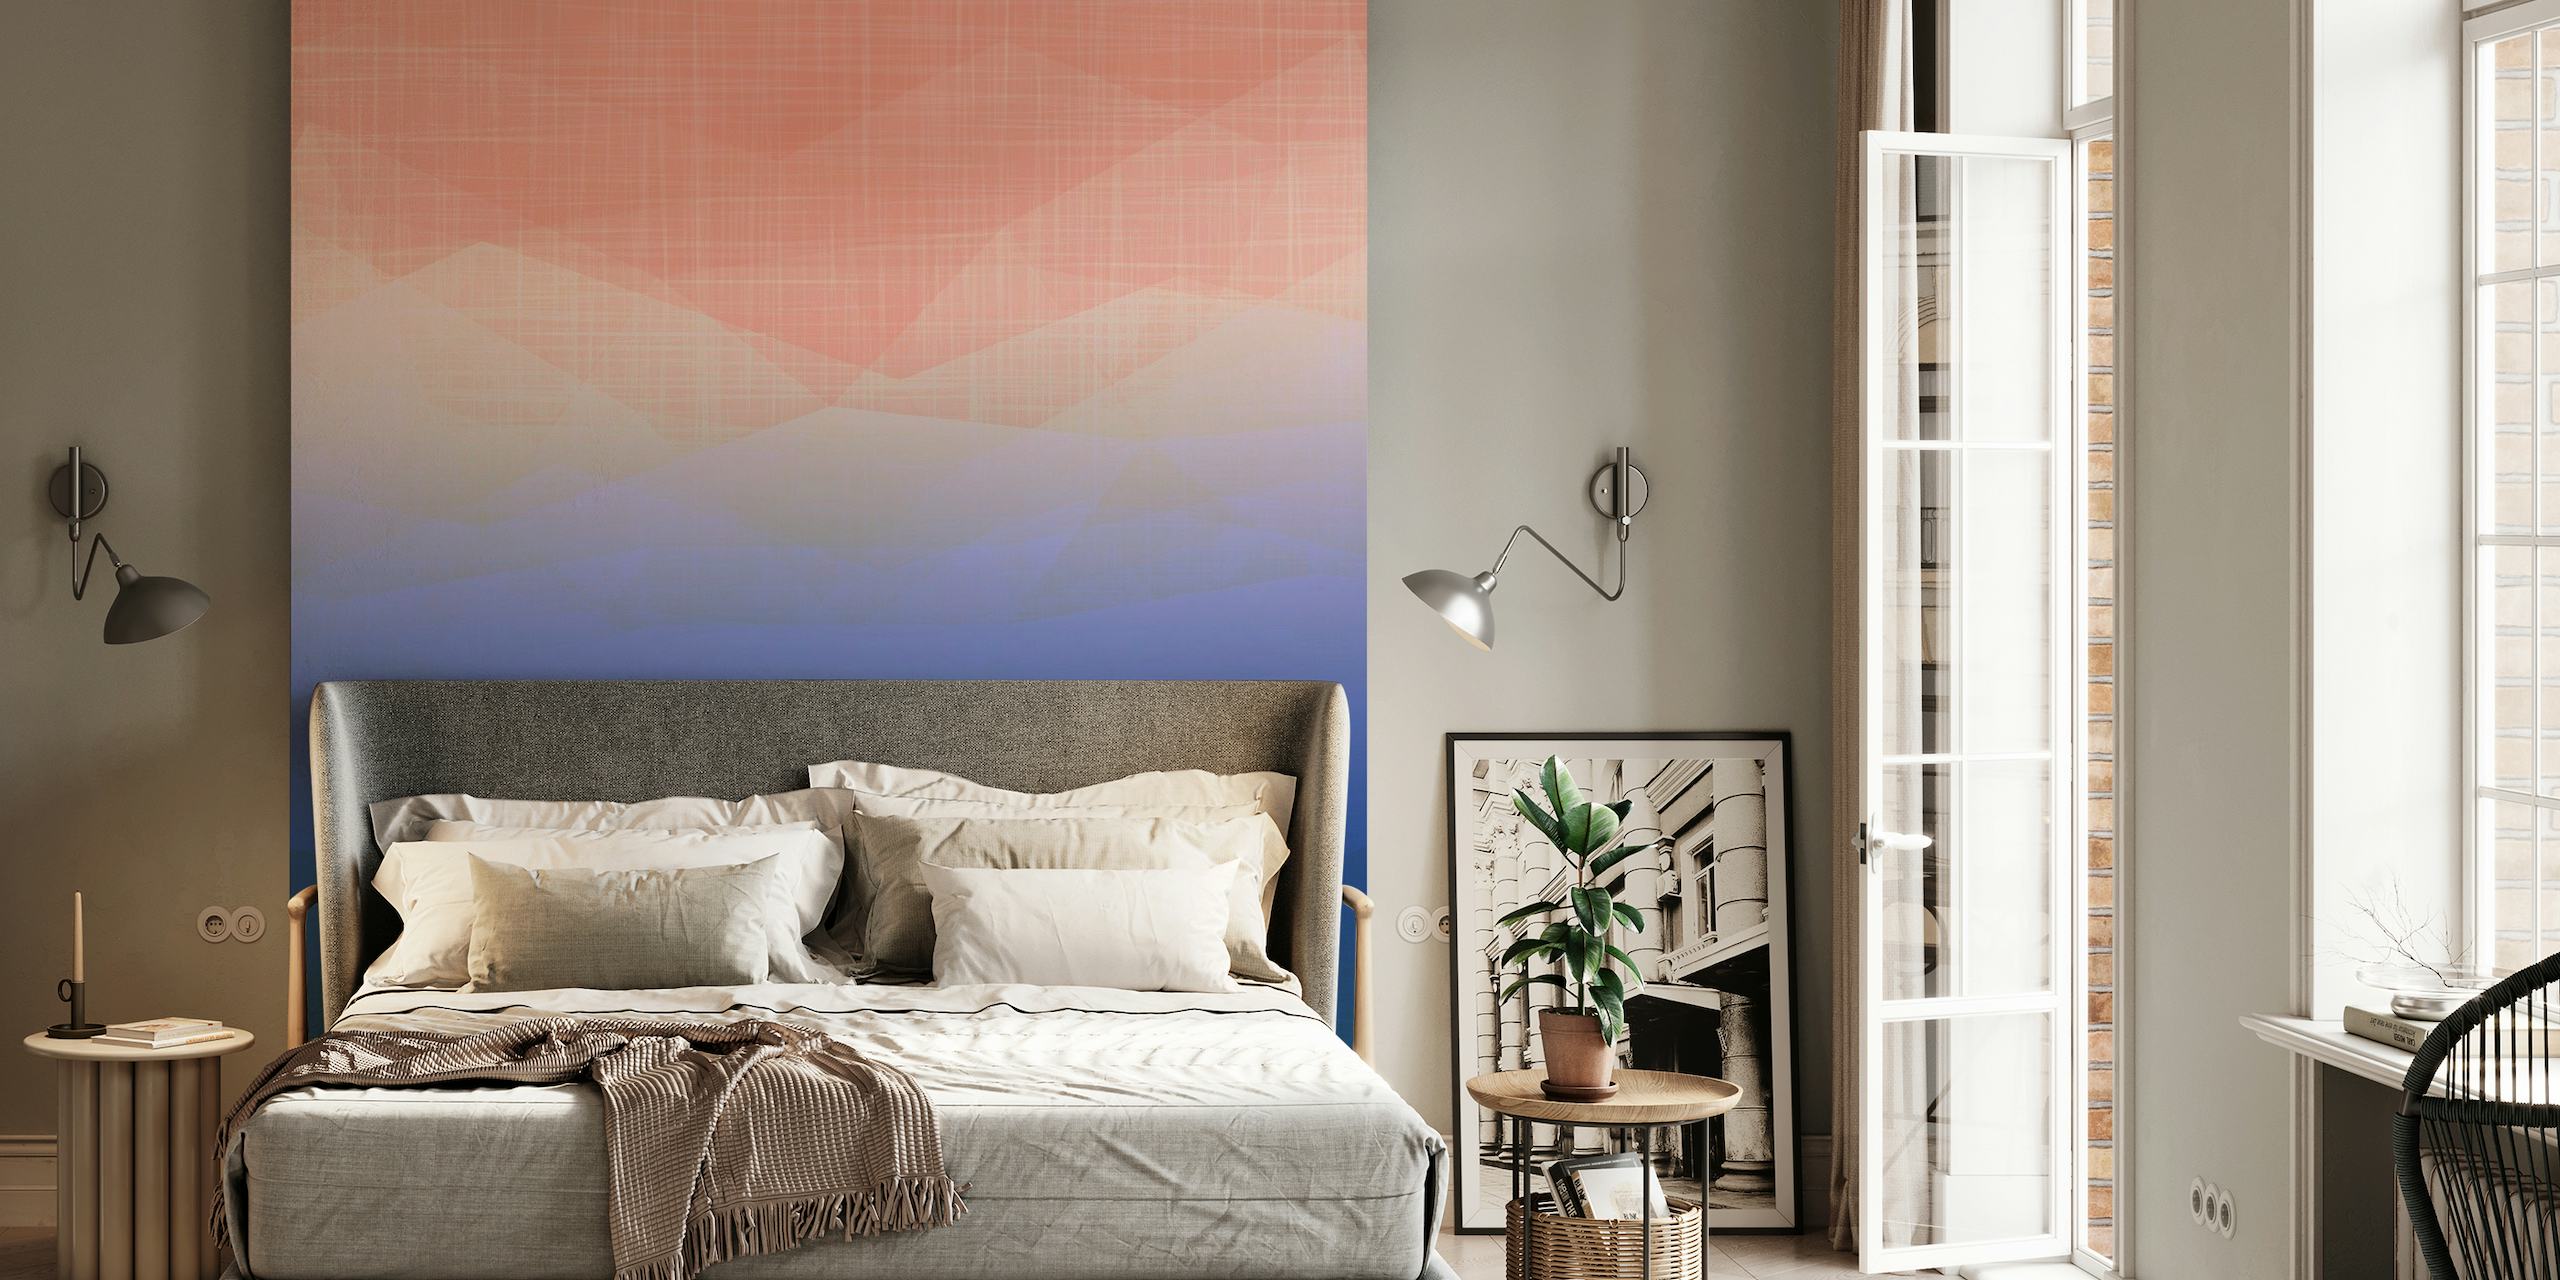 Abstract Peach Morning Sun wall mural with gradient from peach to blue